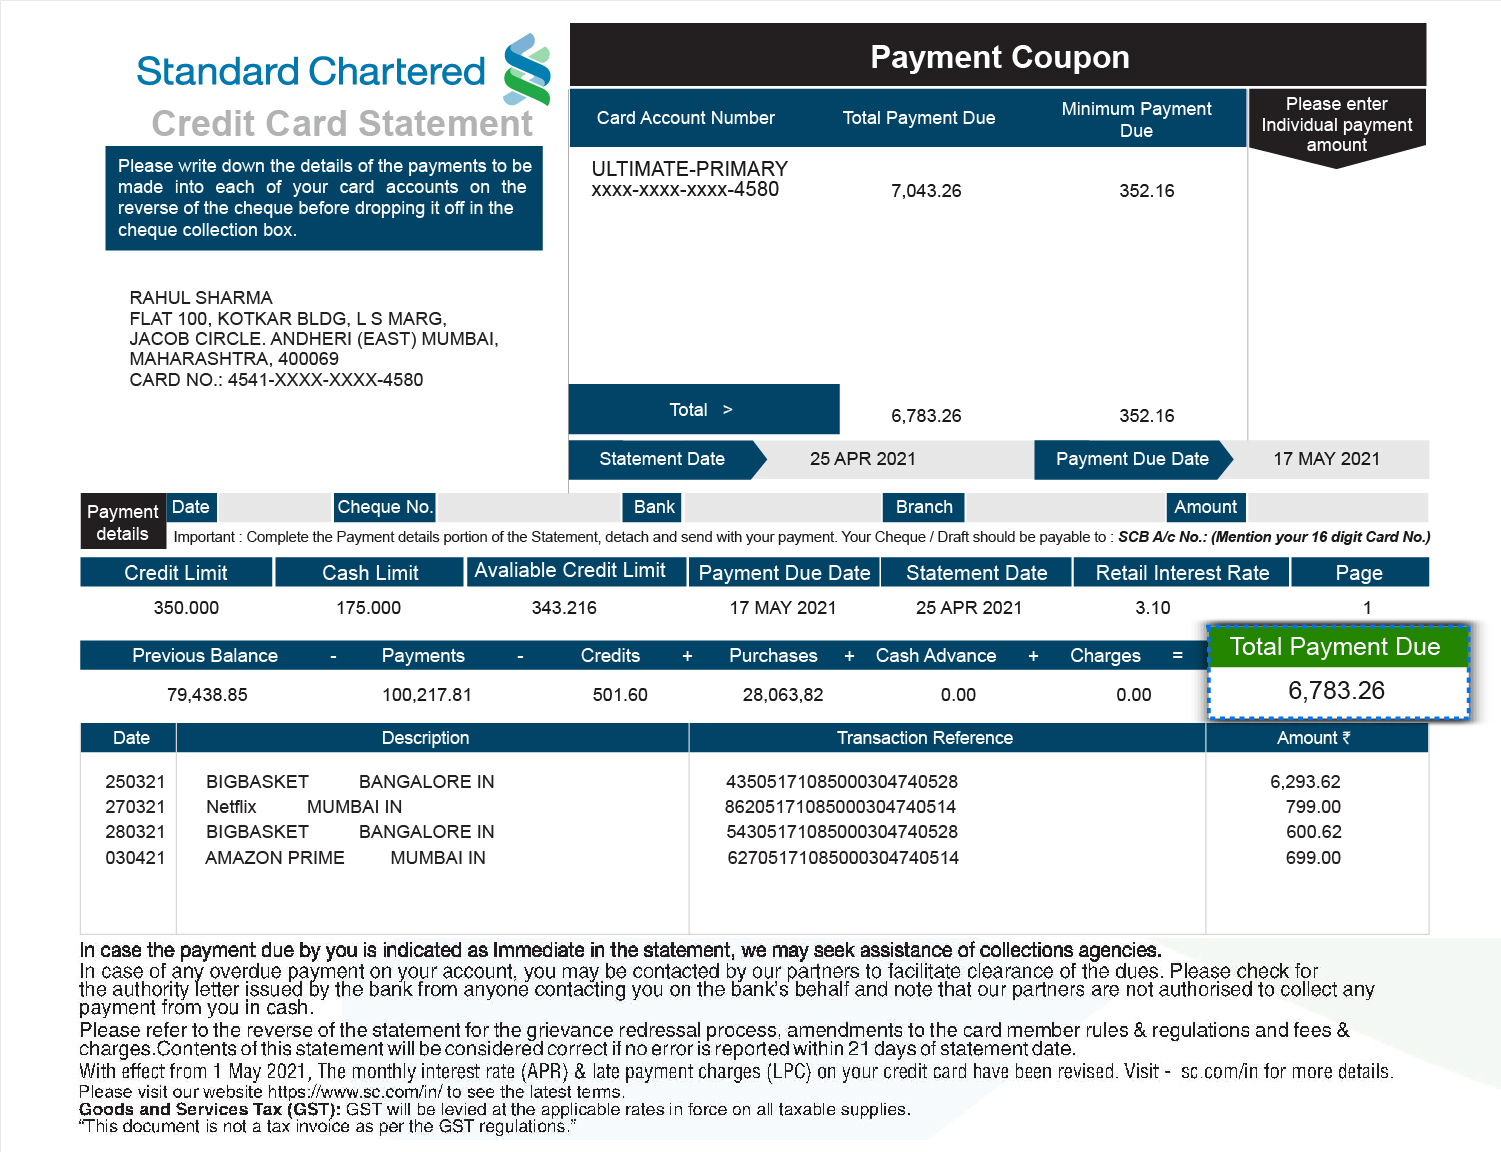 decoding-the-credit-card-statement-standard-chartered-india